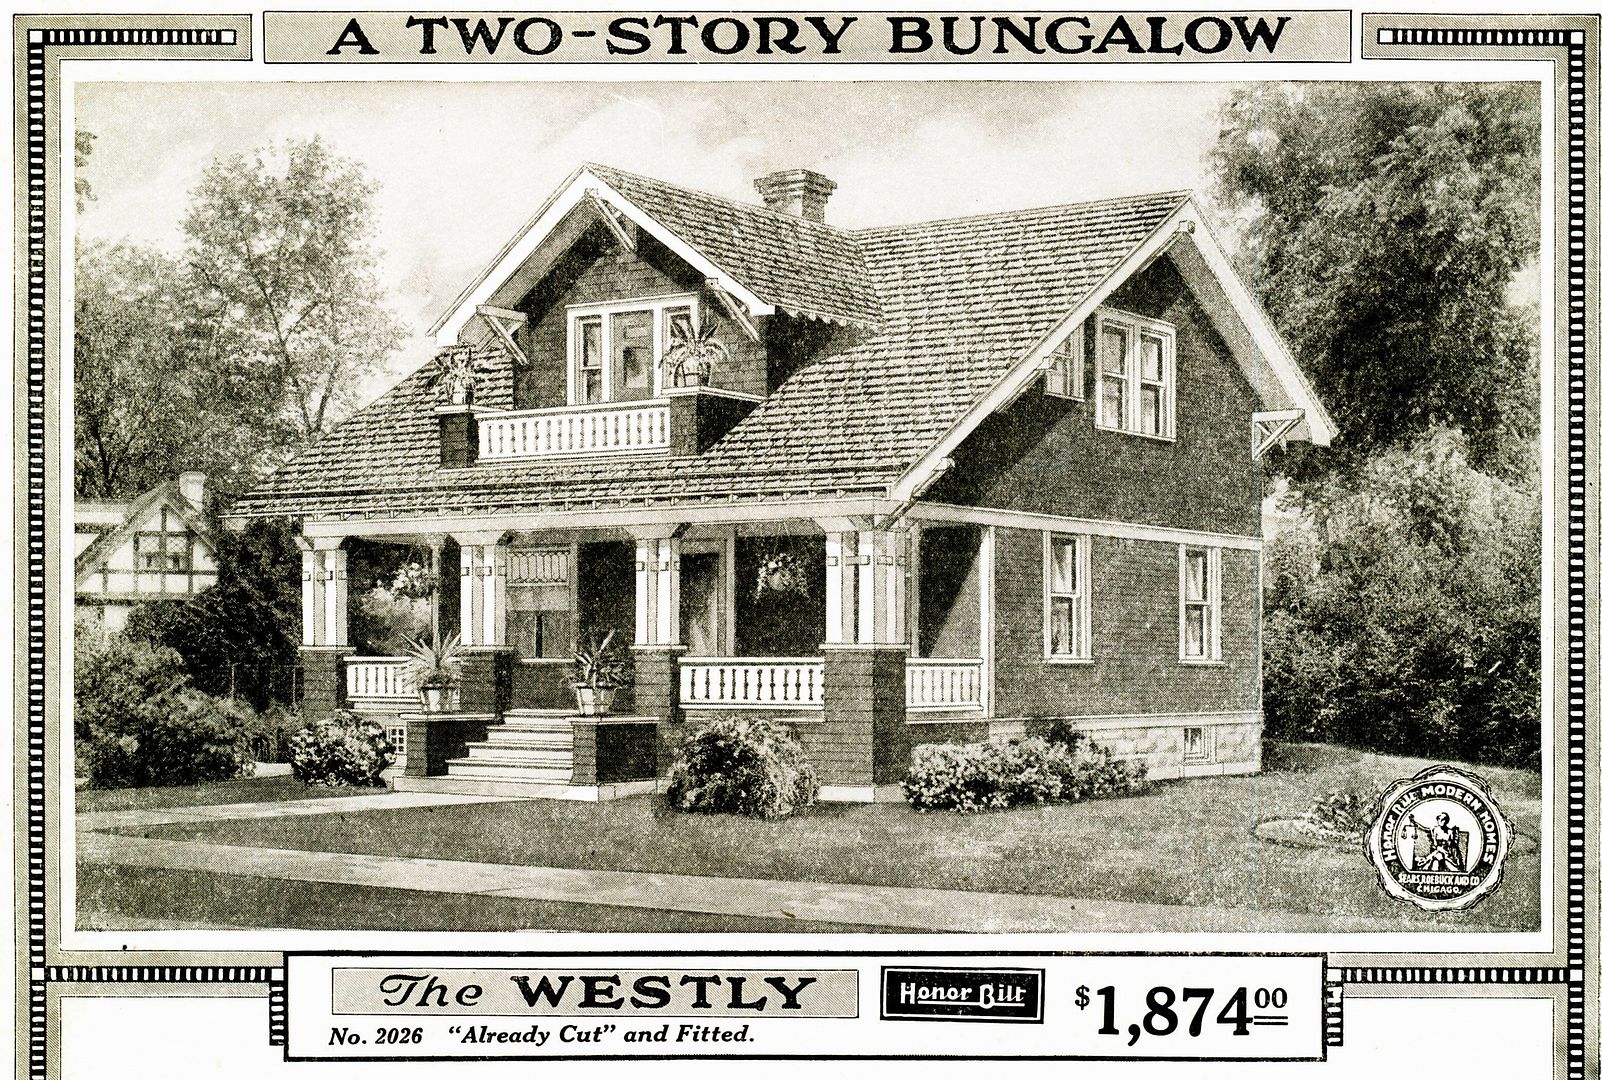 Heres a Westly as seen in the 1919 catalog. 